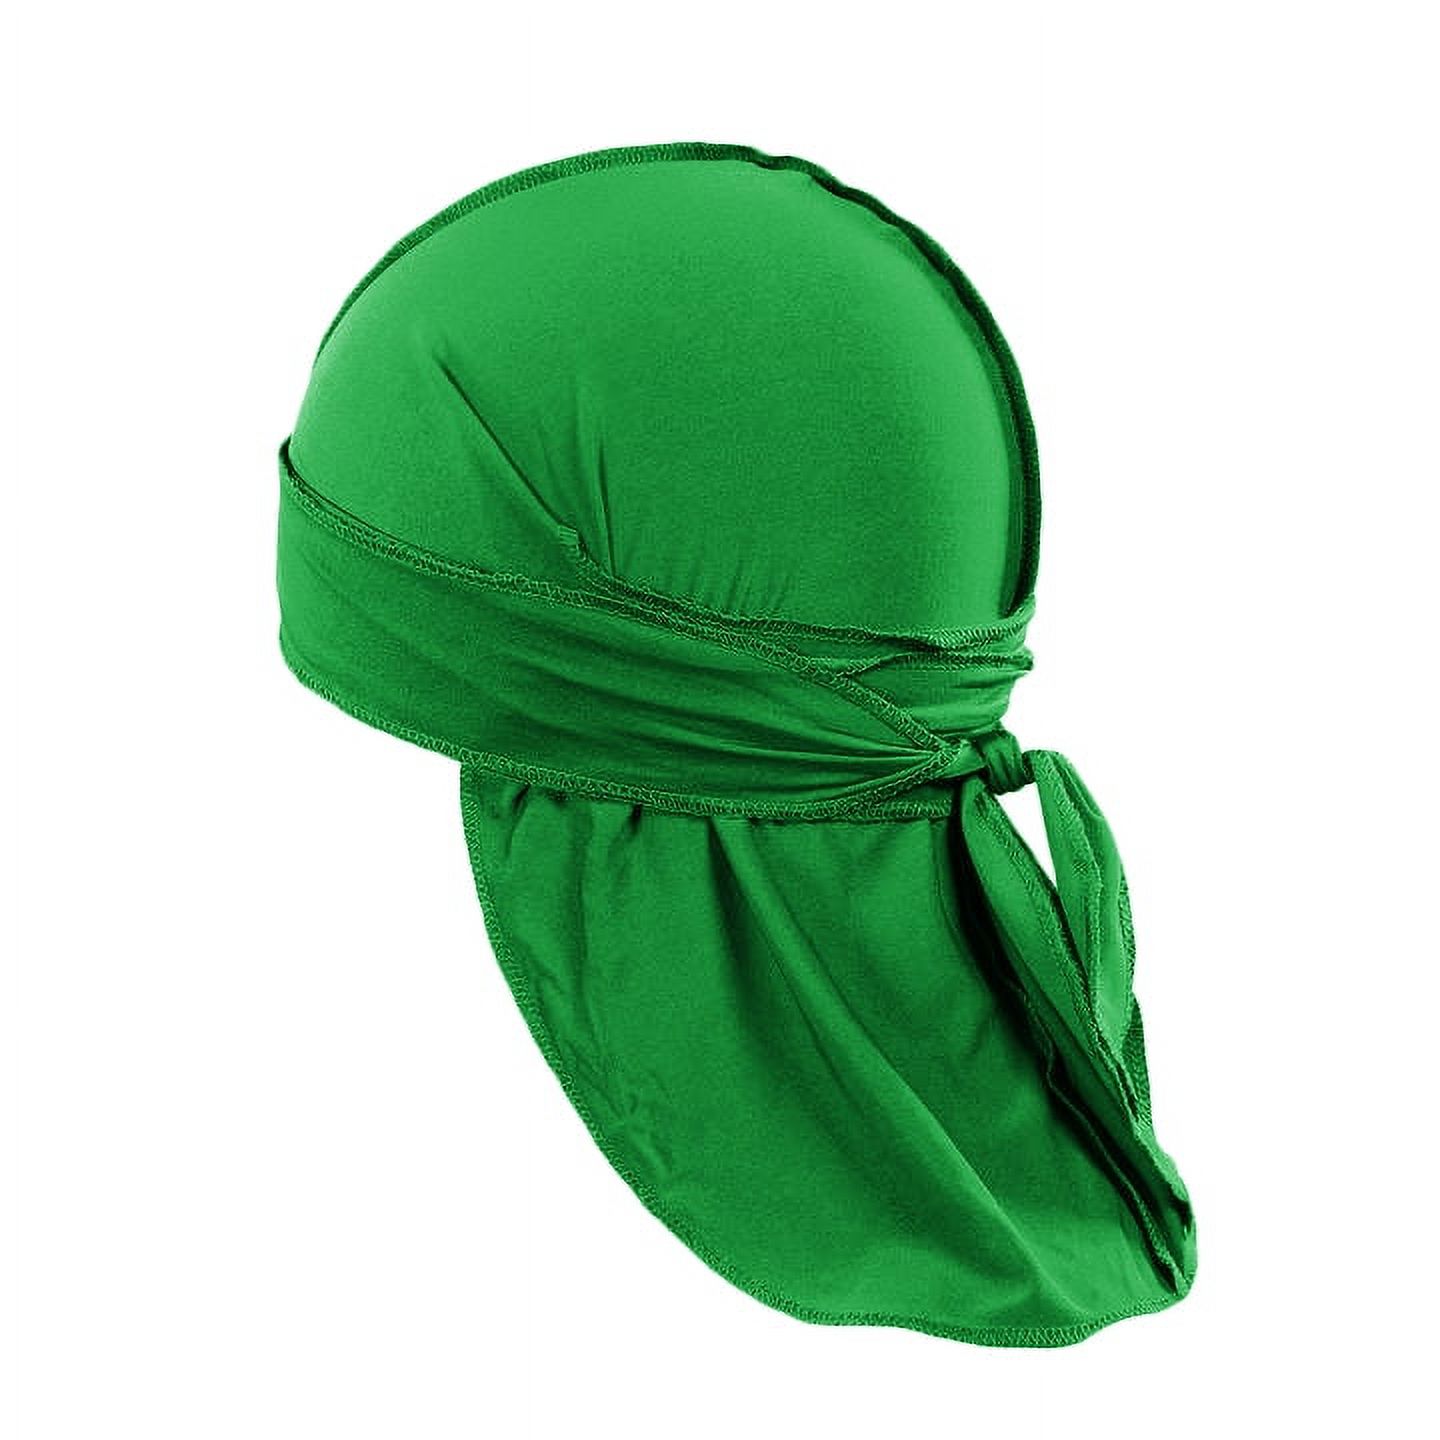 Pack of 3 Durags Headwrap for Men Waves Headscarf Bandana Doo Rag Tail (Green) - image 1 of 4